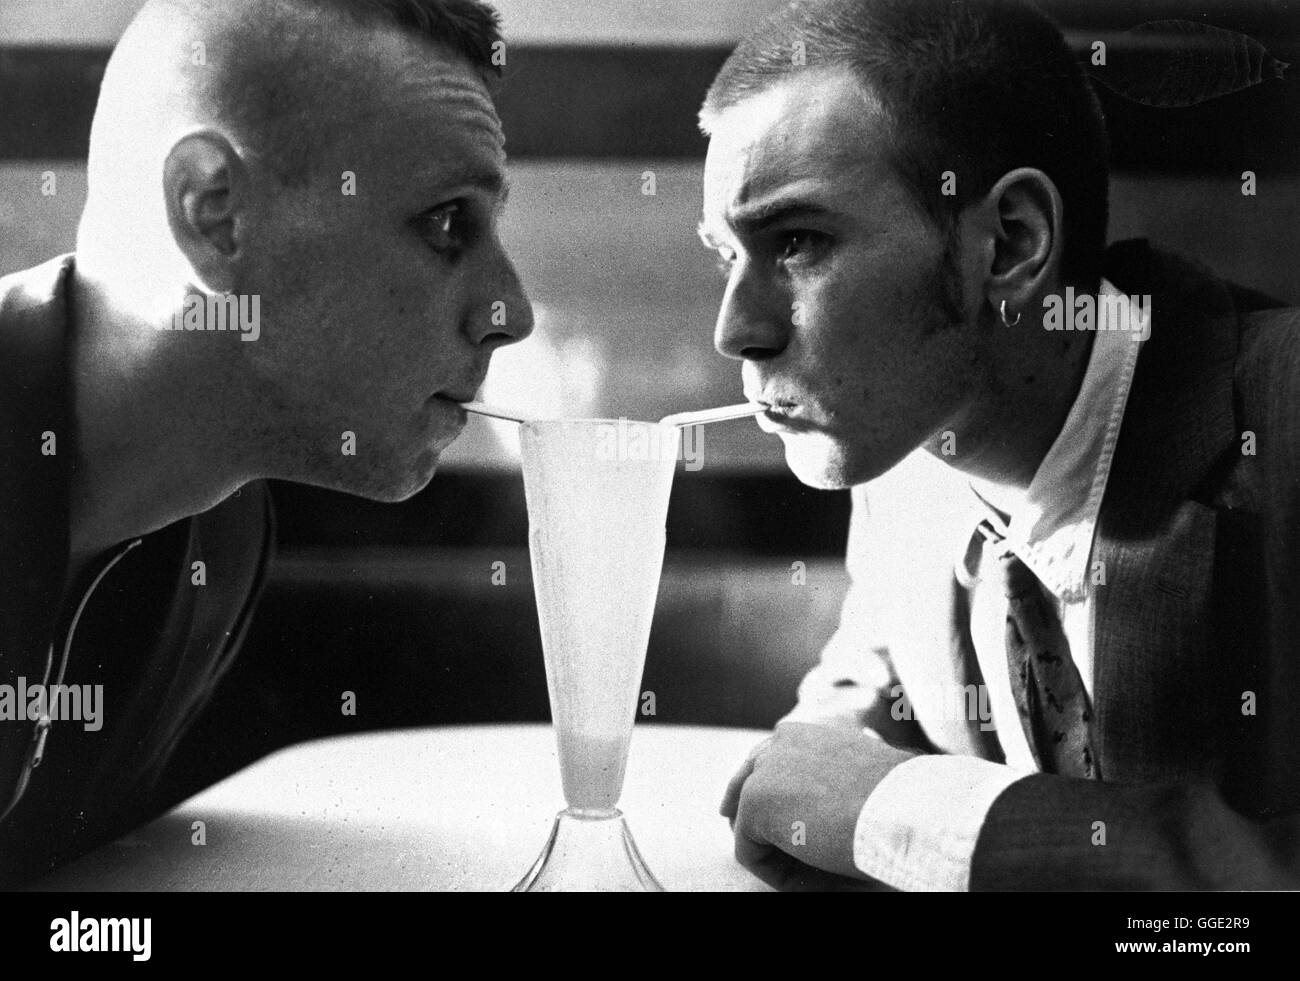 Trainspotting Black and White Stock Photos & Images - Alamy